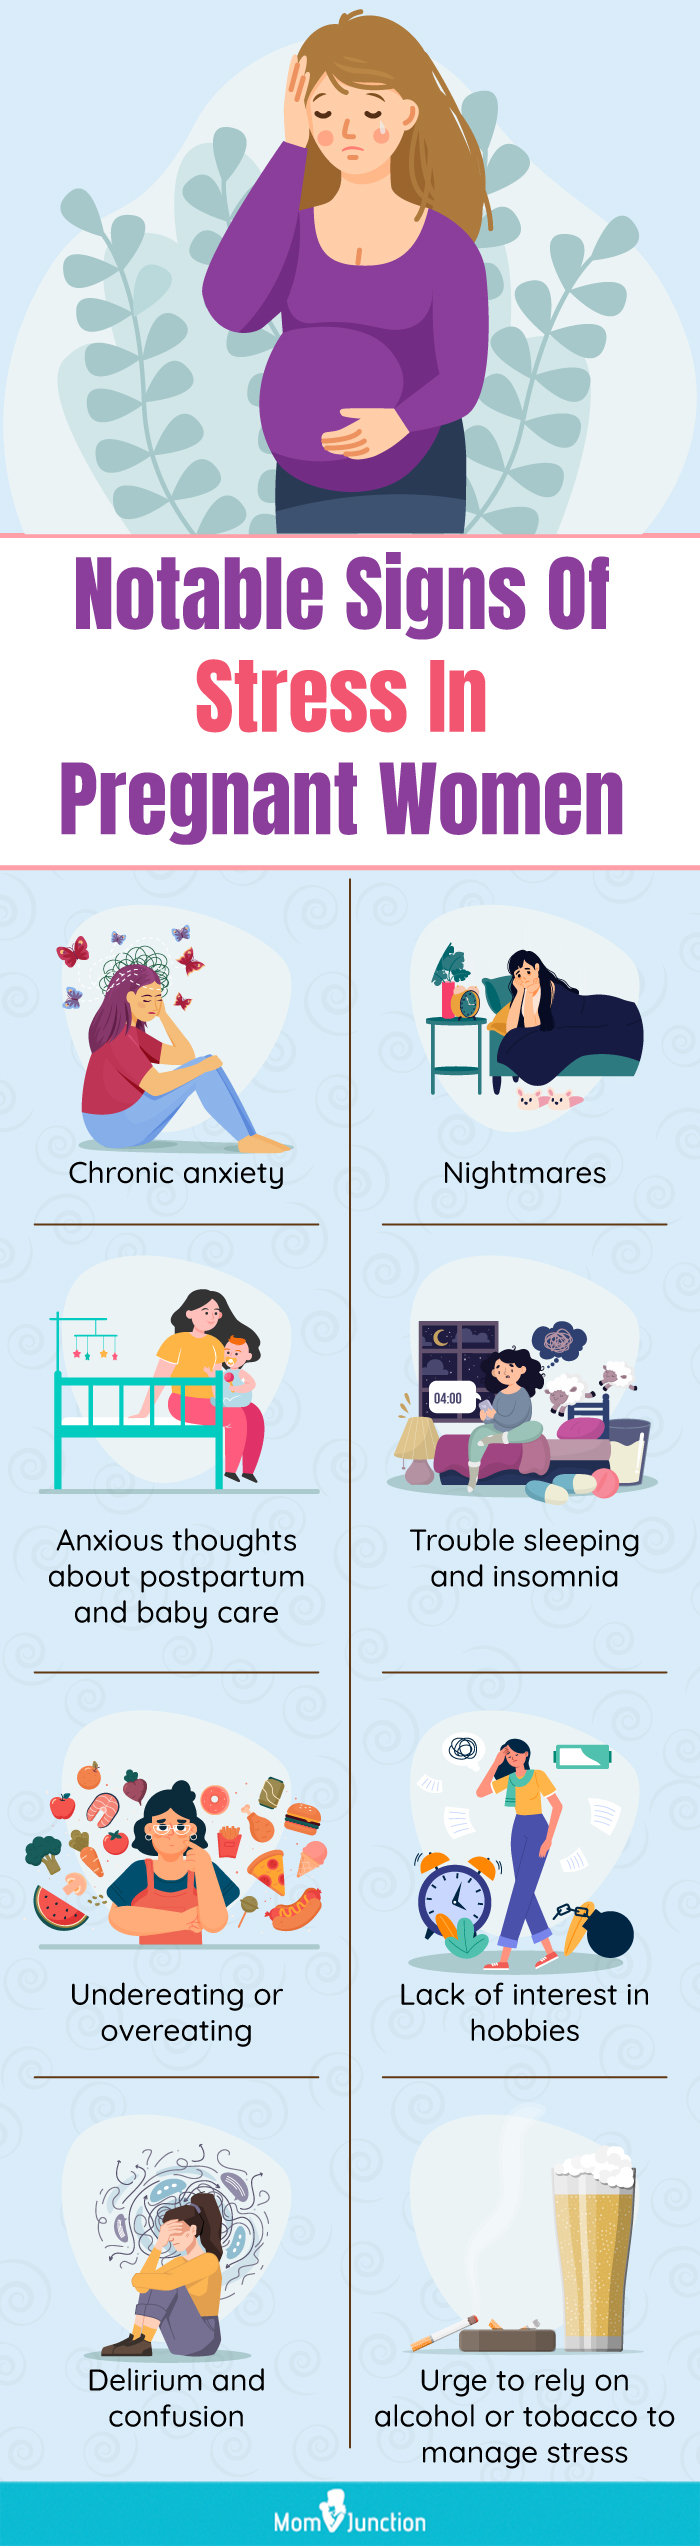 notable signs of stress in pregnant women (infographic)